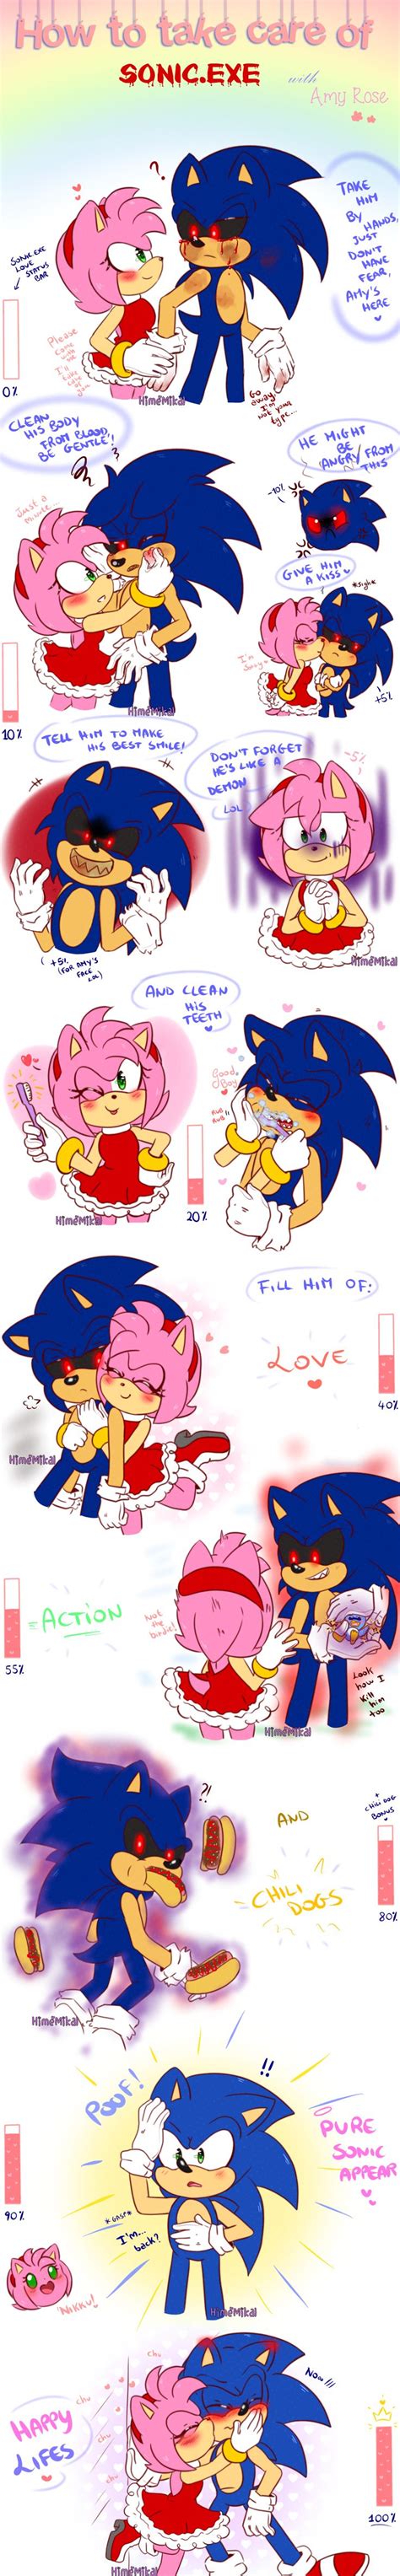 How To Take Care Of Sonicexe By Himemikal On Deviantart Sonic